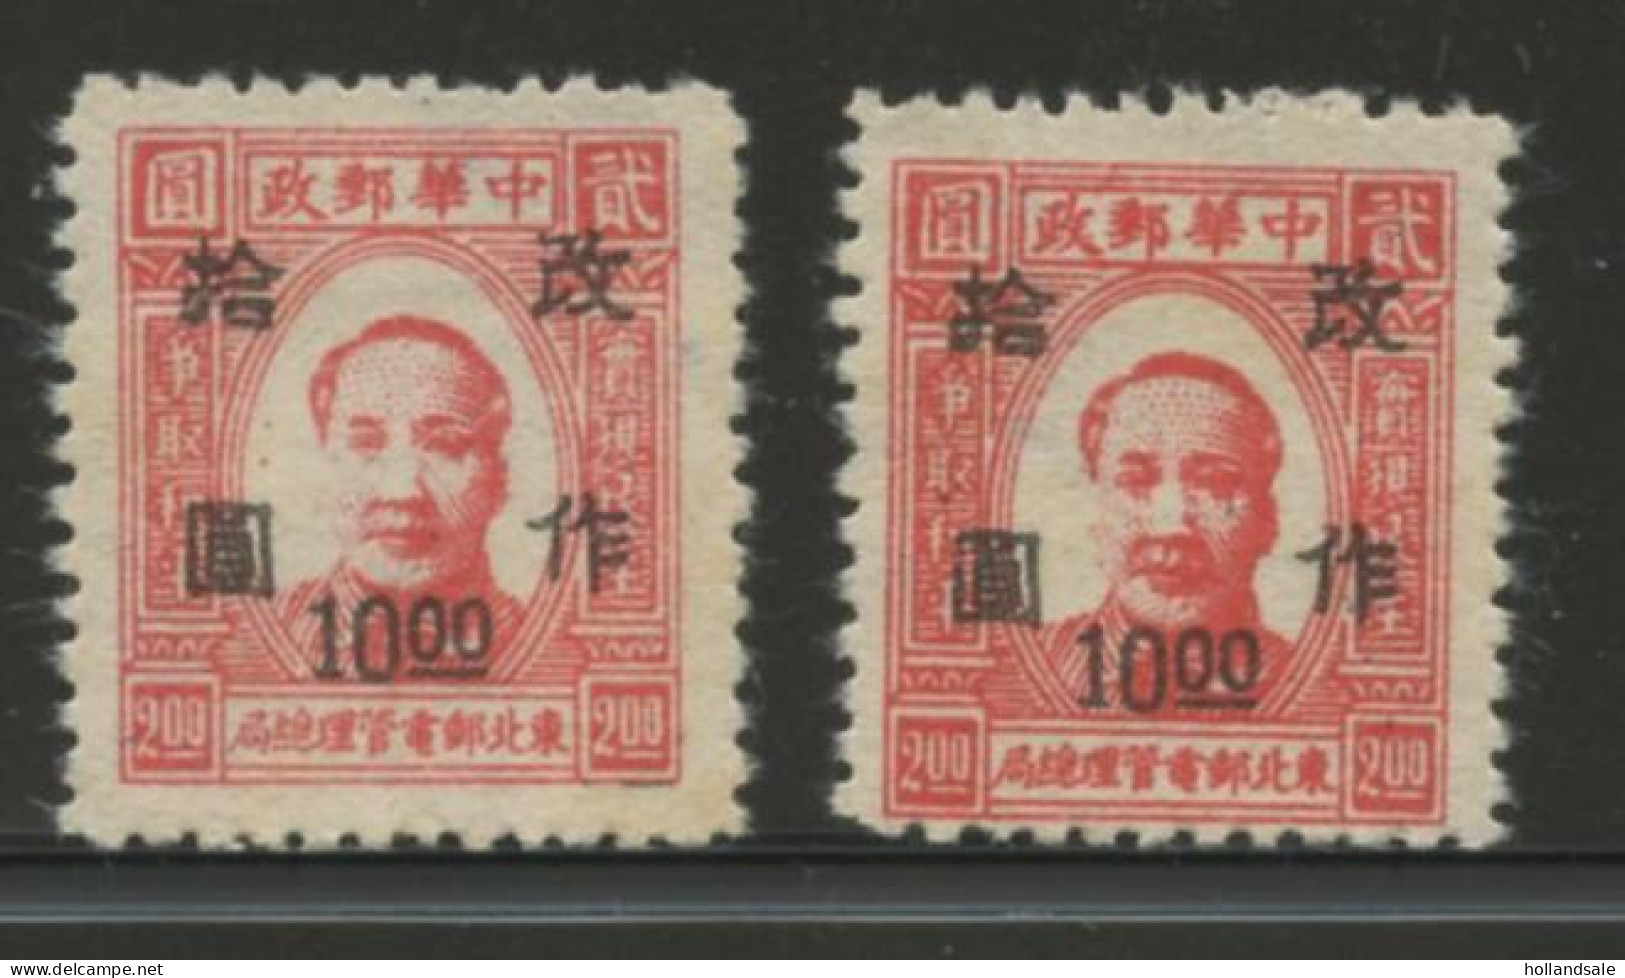 CHINA NORTH EAST - 1947  MICHEL # 62b. Two (2) Unused Stamps. - Chine Du Nord-Est 1946-48